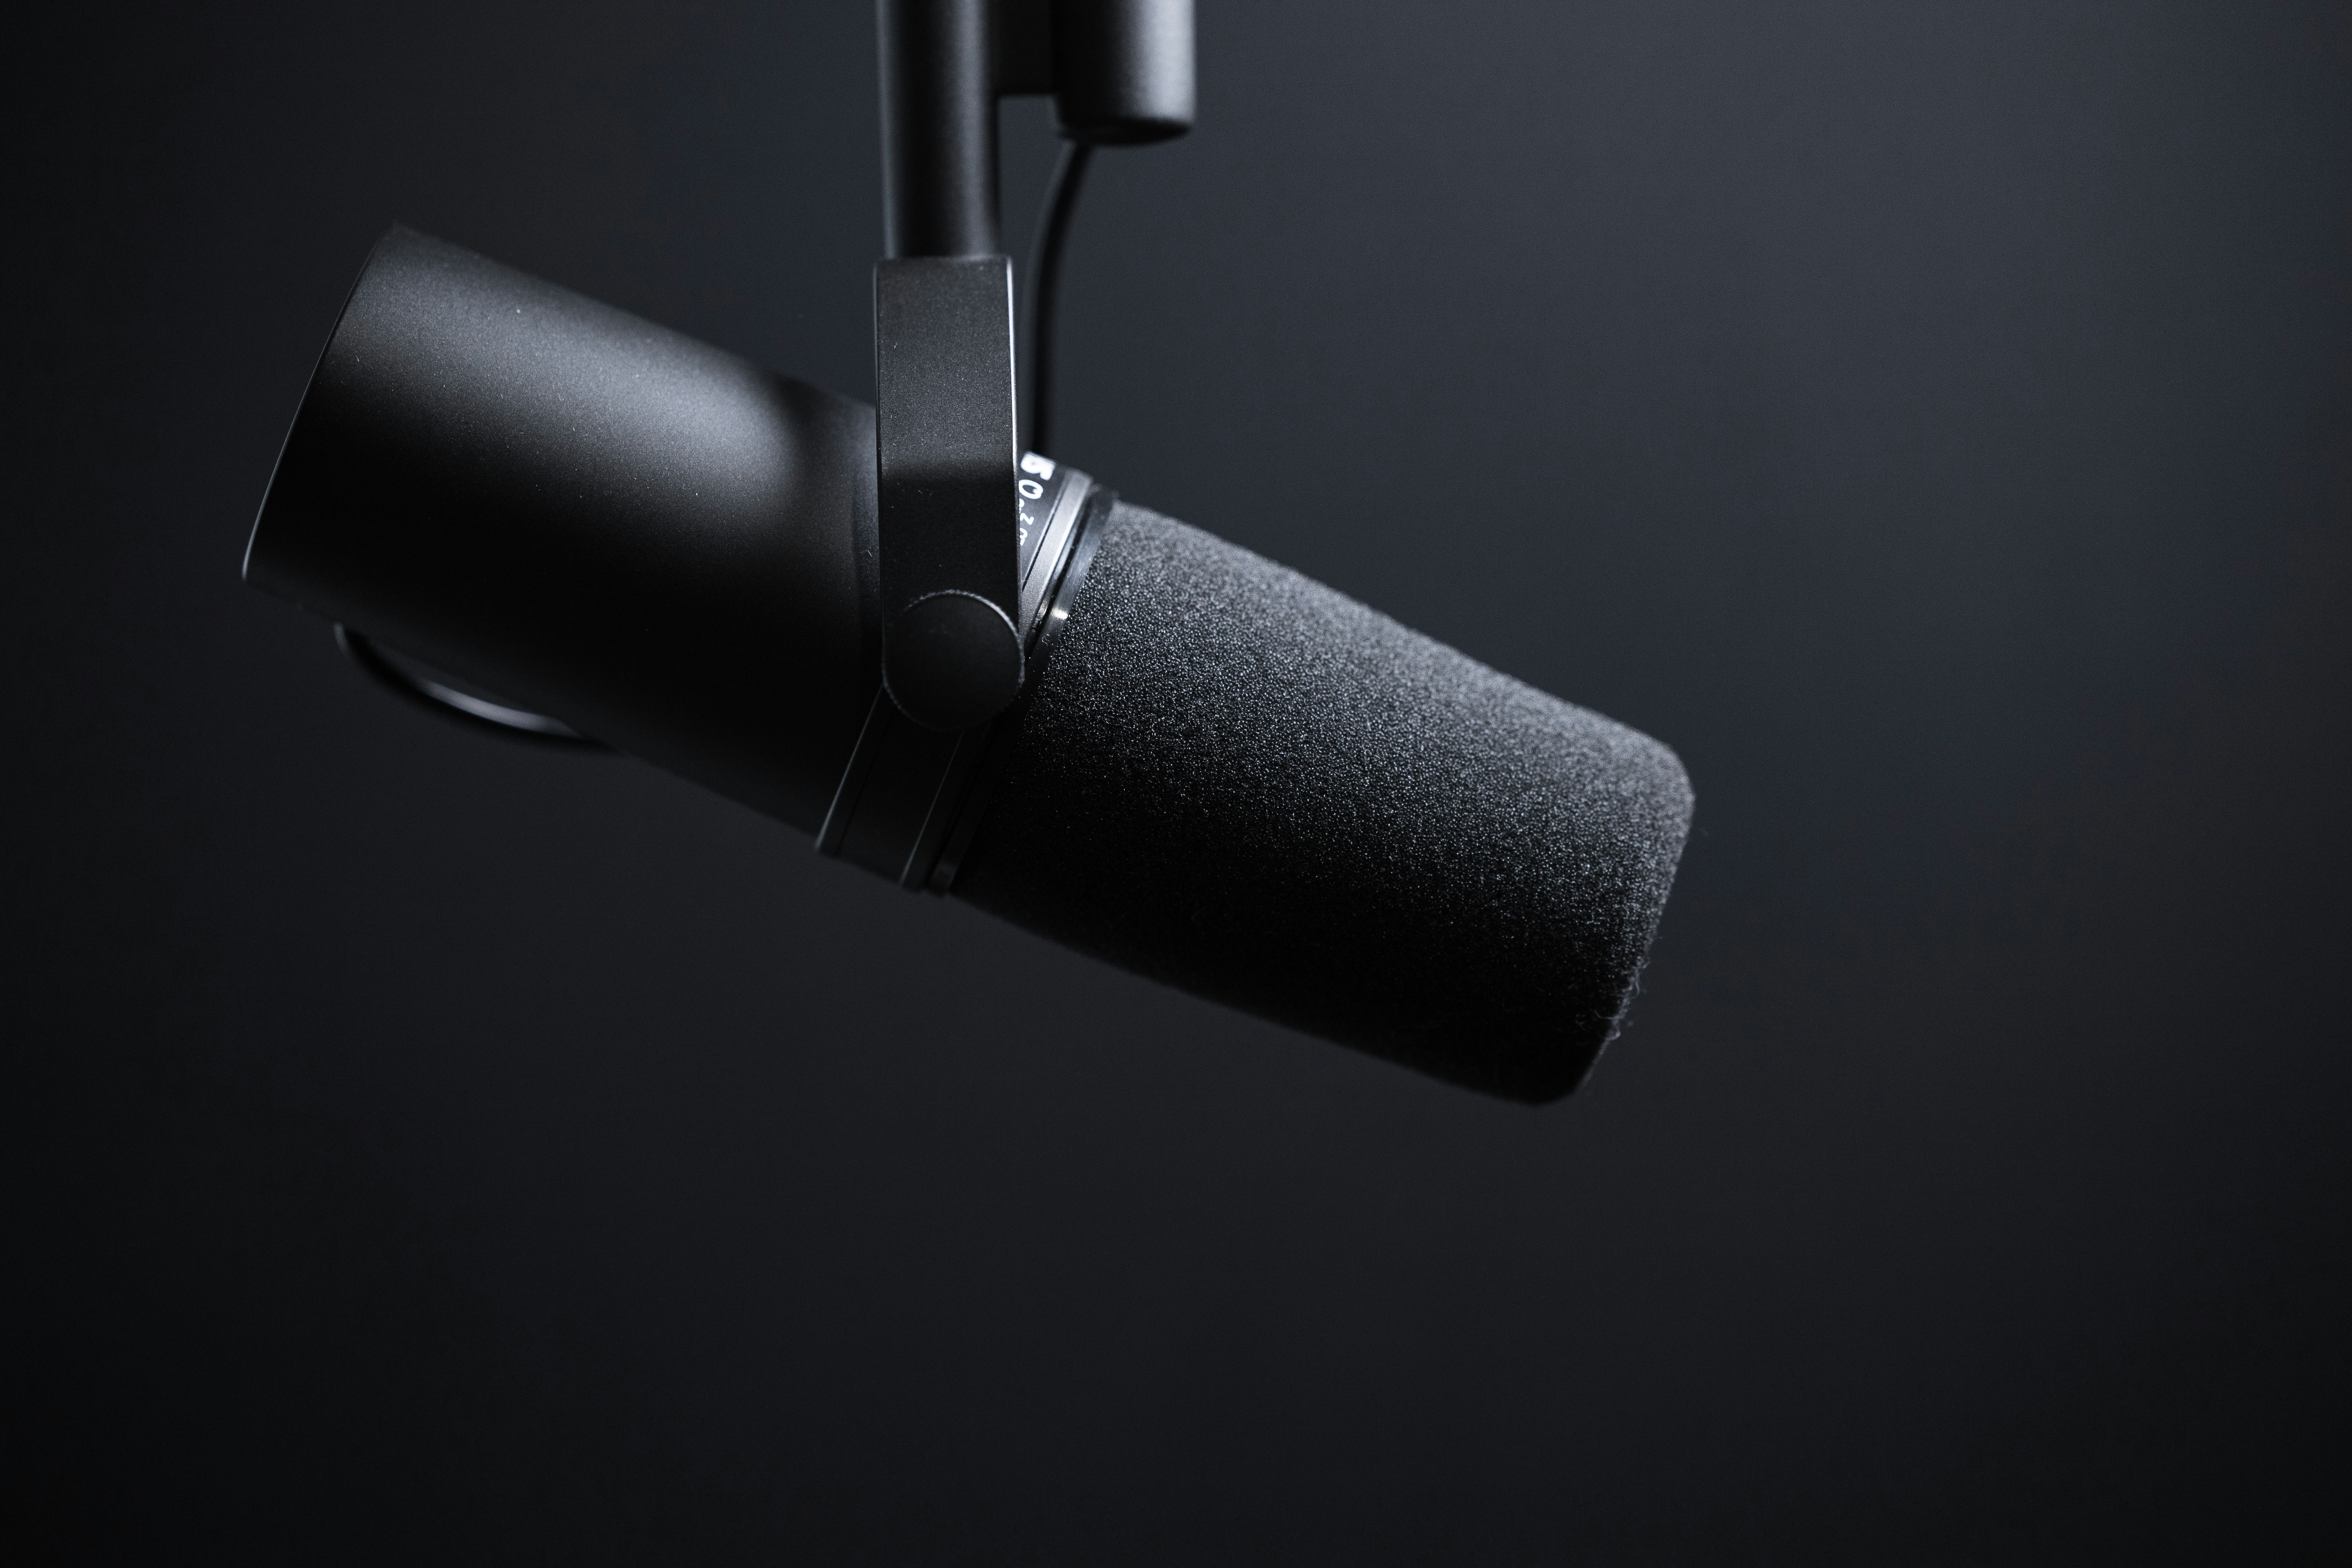 How To Find Your Voice: Tips For Beginning Podcasters